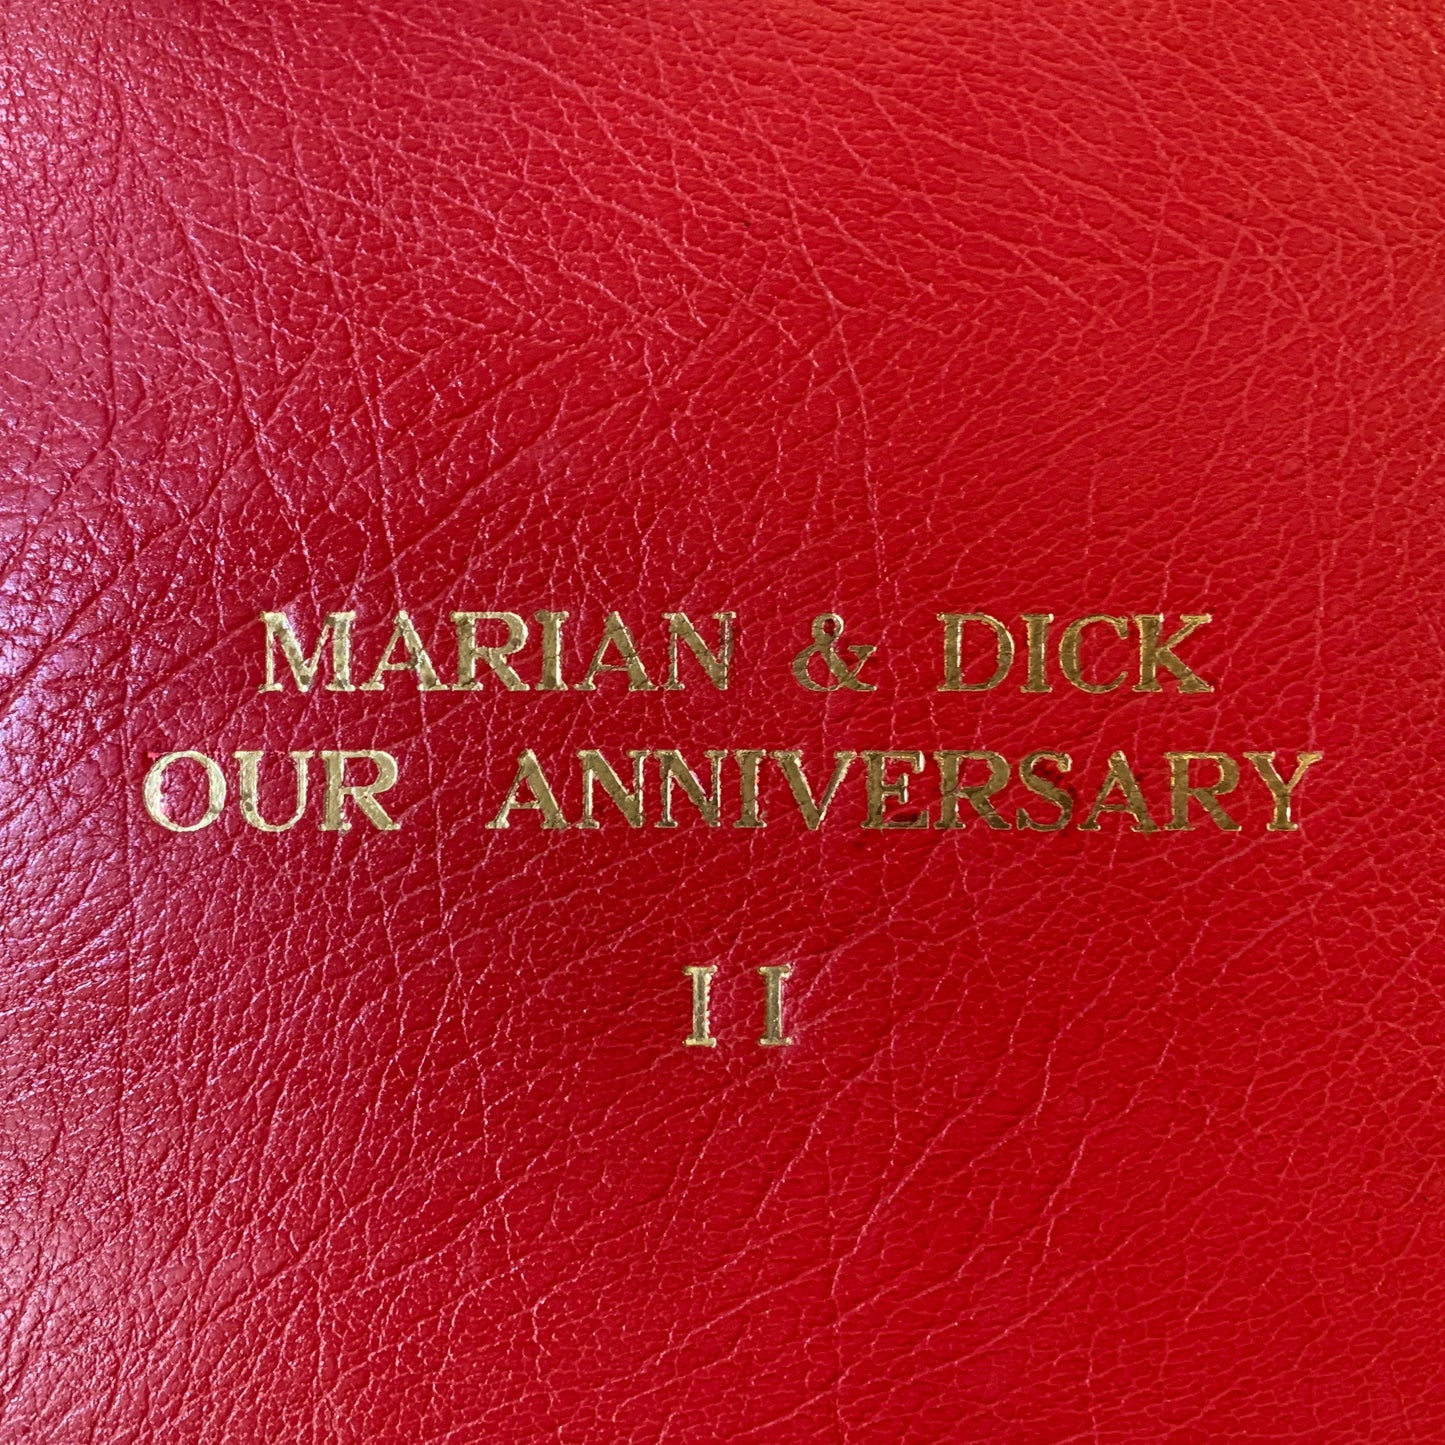 Leatherbound Scrapbook | Photo Album | Scarlet Embossed Calf | Thick Pages | 10" x 12" | MARIAN & DICK | 3 Lines of Text